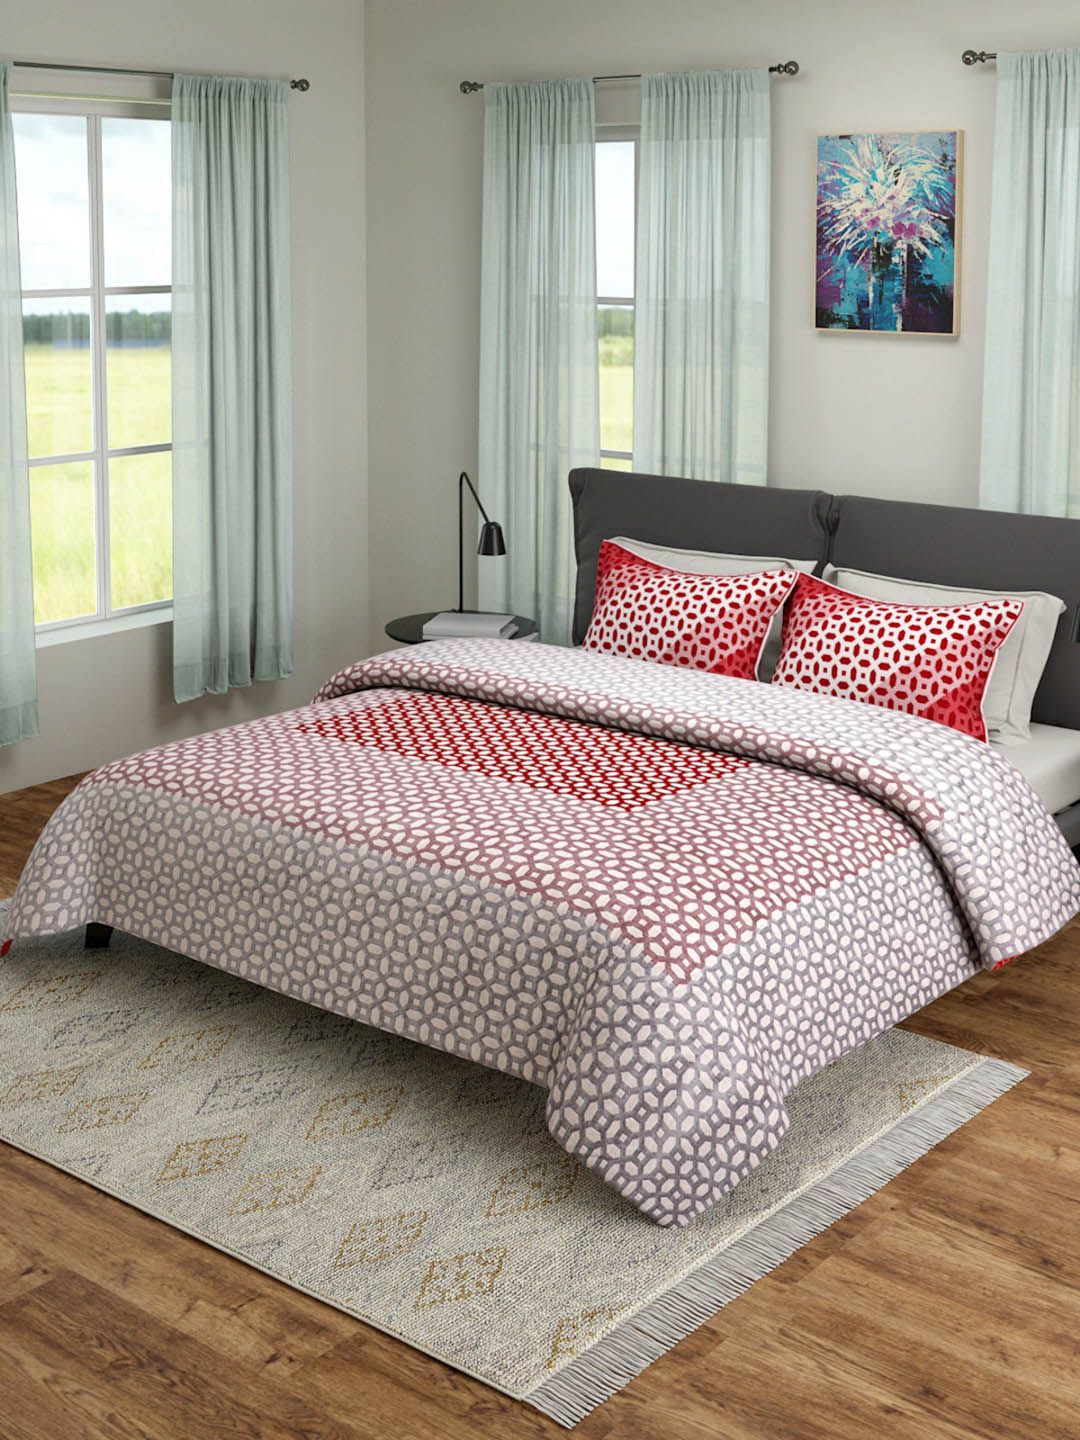 ROMEE Maroon & White Queen Sized Printed 180TC Bed Cover With 2 Pillow Cases Price in India